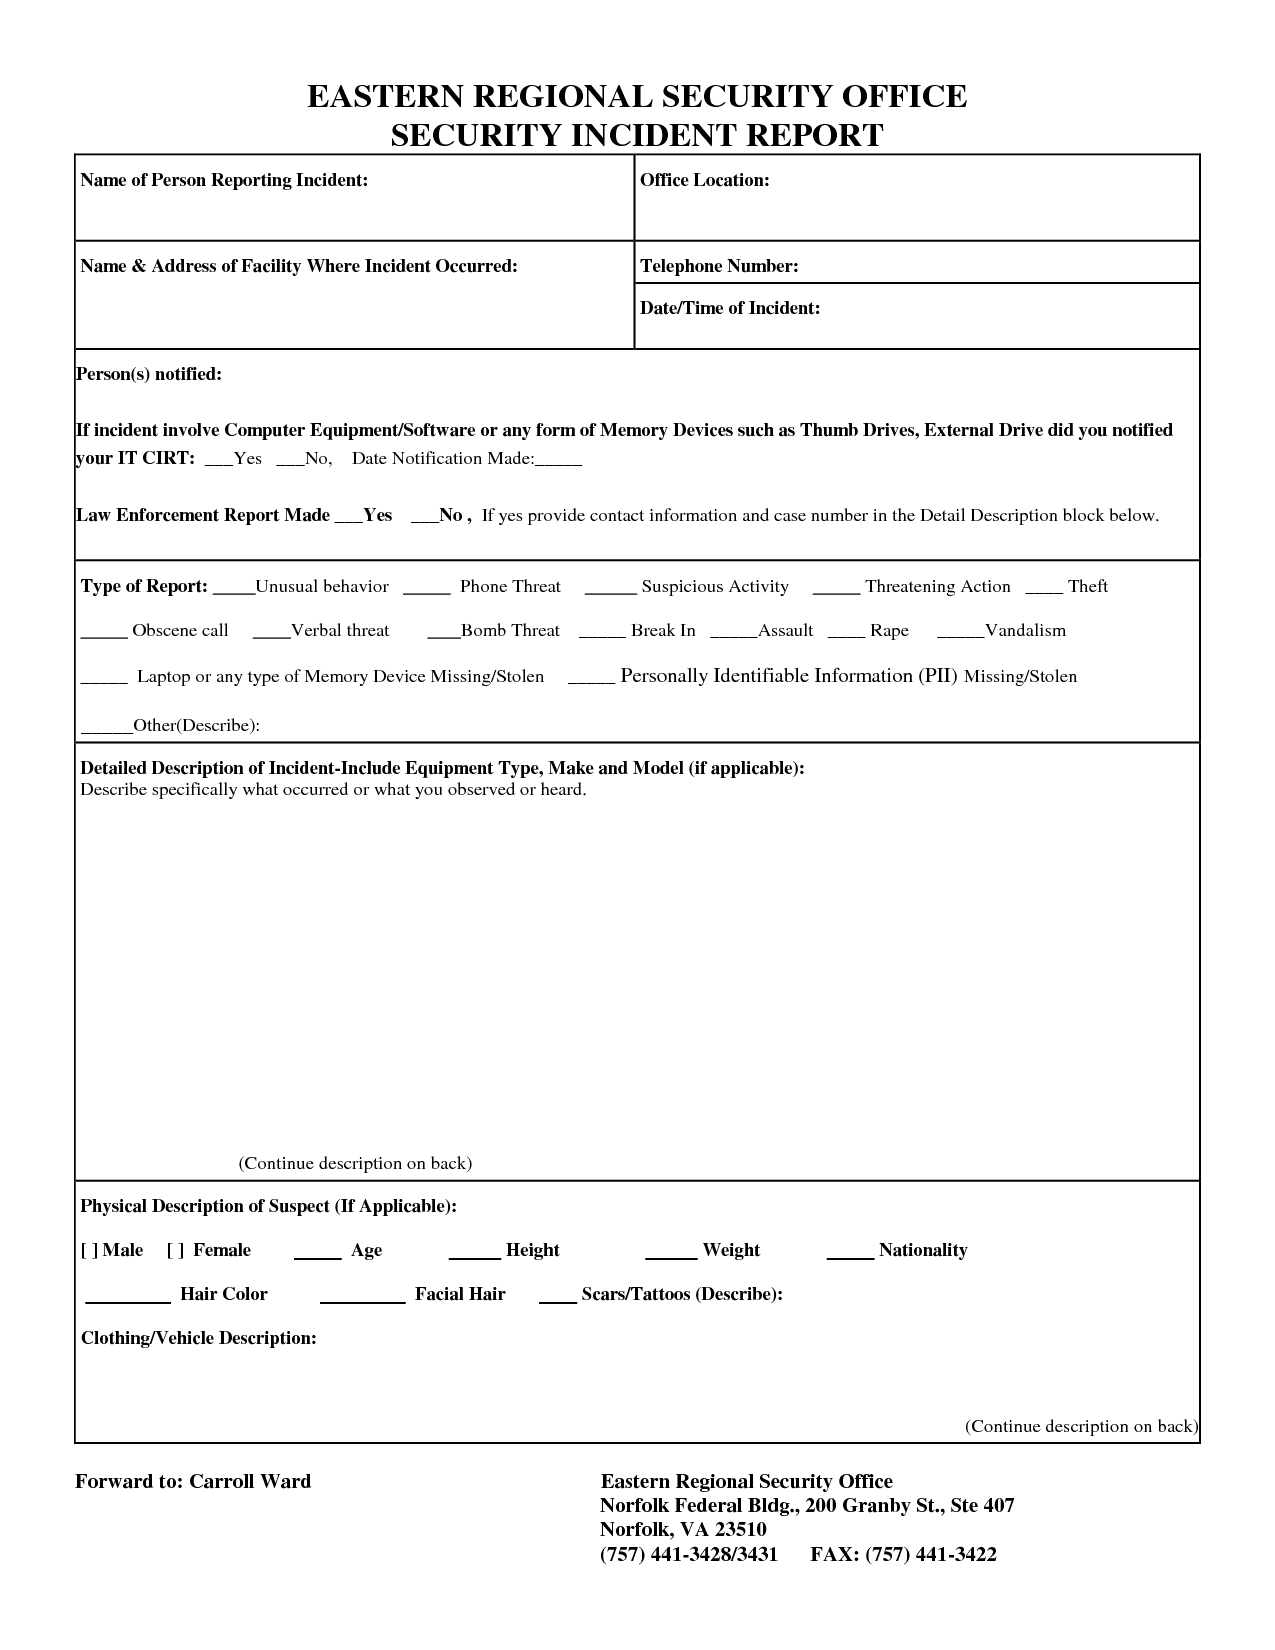 Cyber Security Incident Report Form And Security Incident Report Form Doc